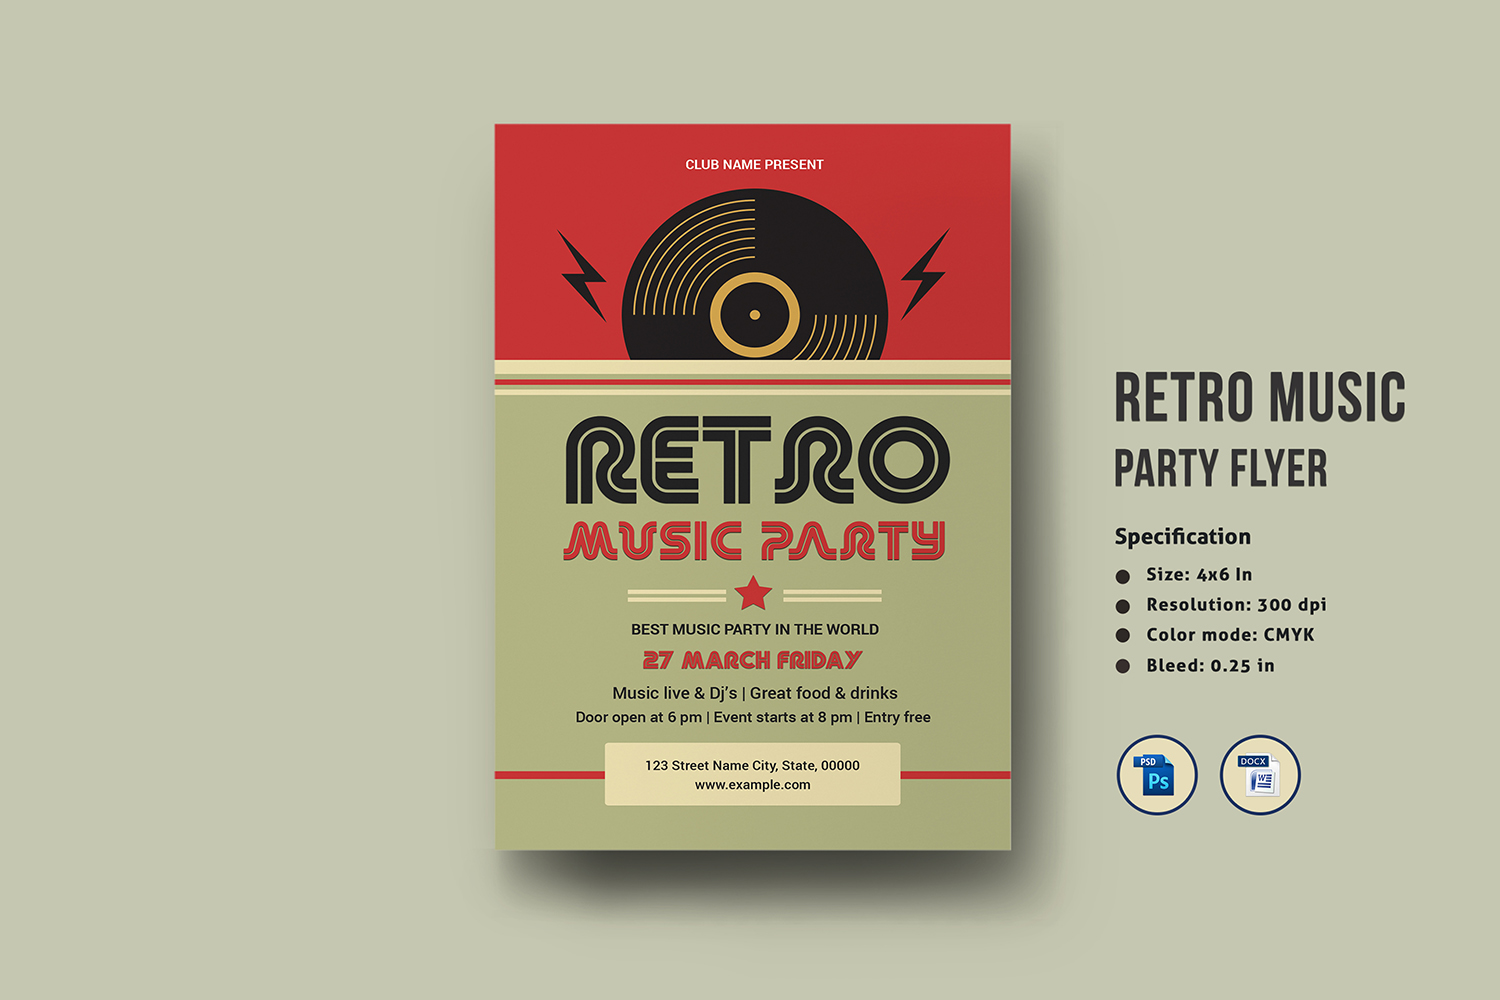 Retro Music Party Flyer Template